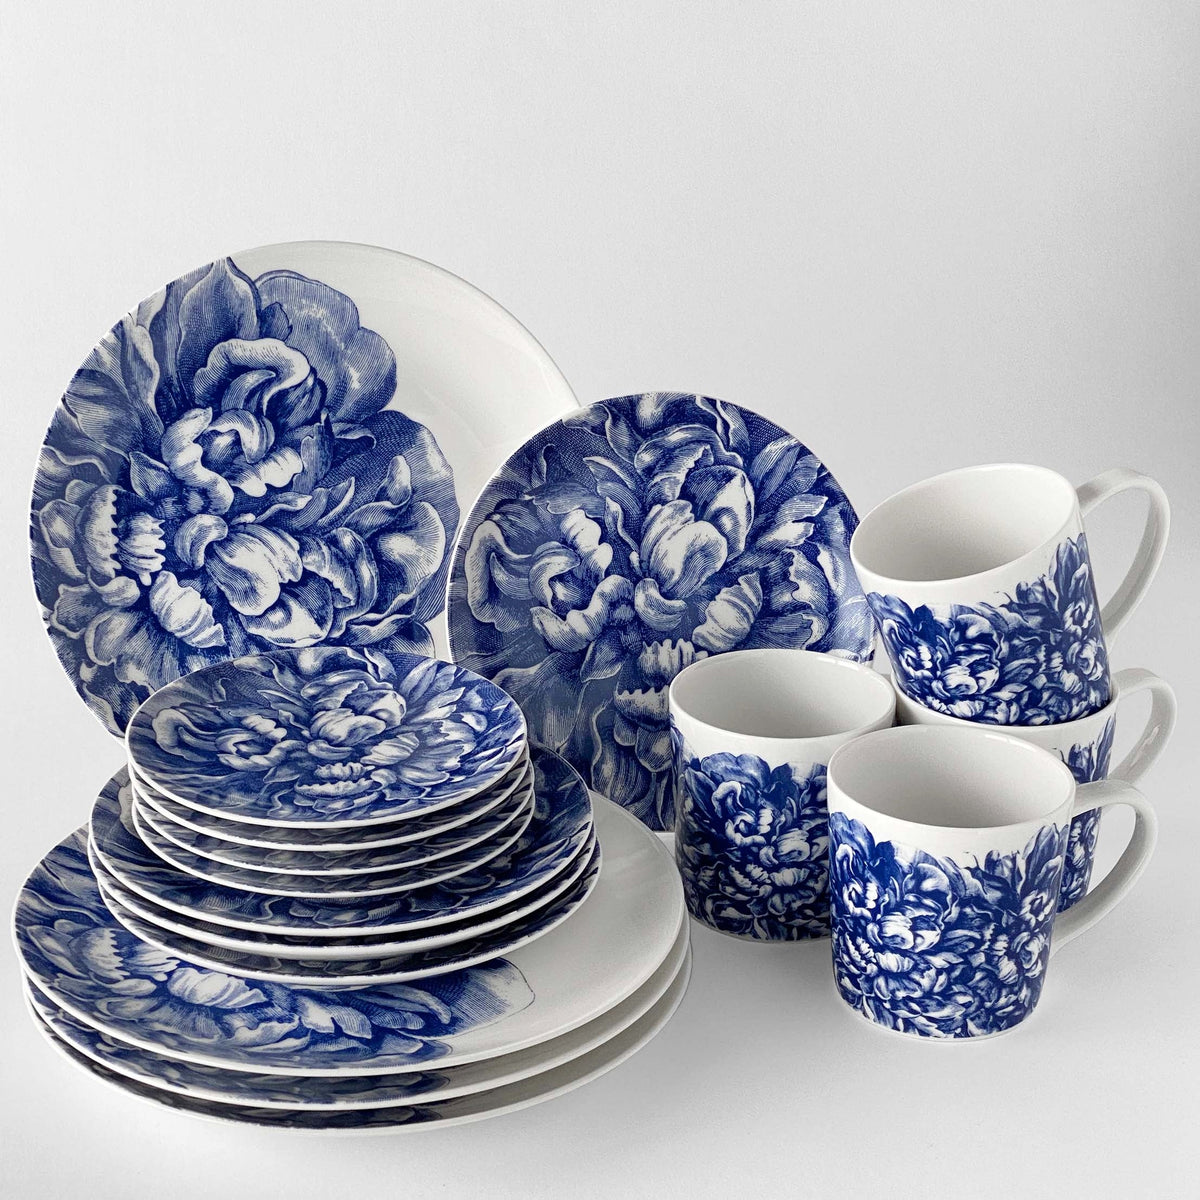 A set of blue and white floral patterned premium porcelain Peony mugs and dishes by Caskata Artisanal Home arranged neatly against a white background.